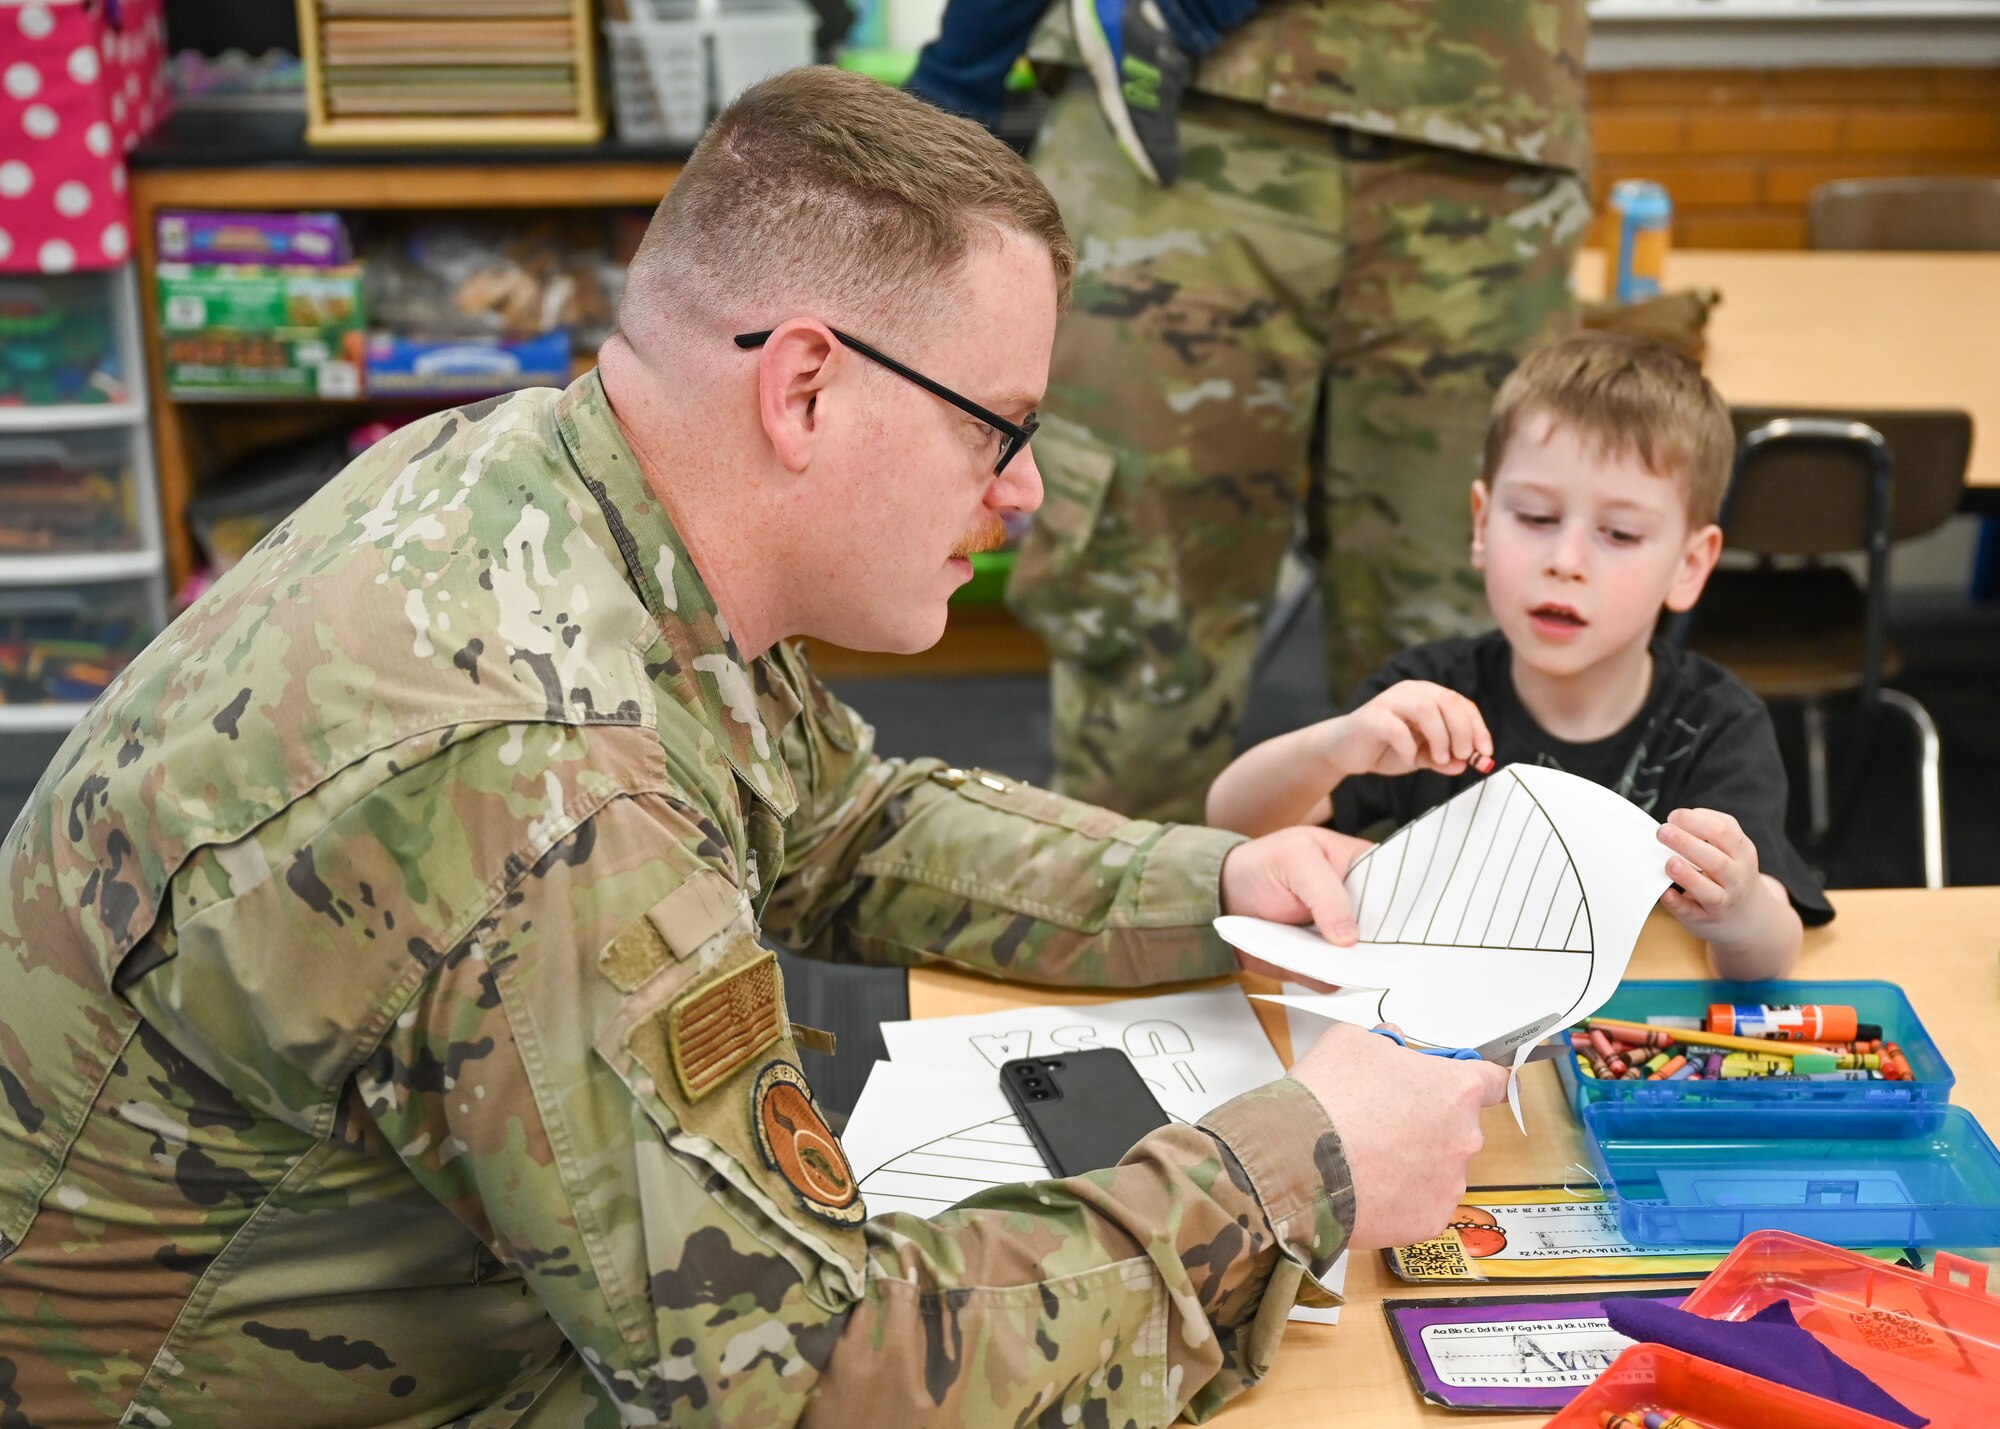 Staff Sgt. Joshua Buckley, 388th Munitions Squadron, and son Fenrin, color together